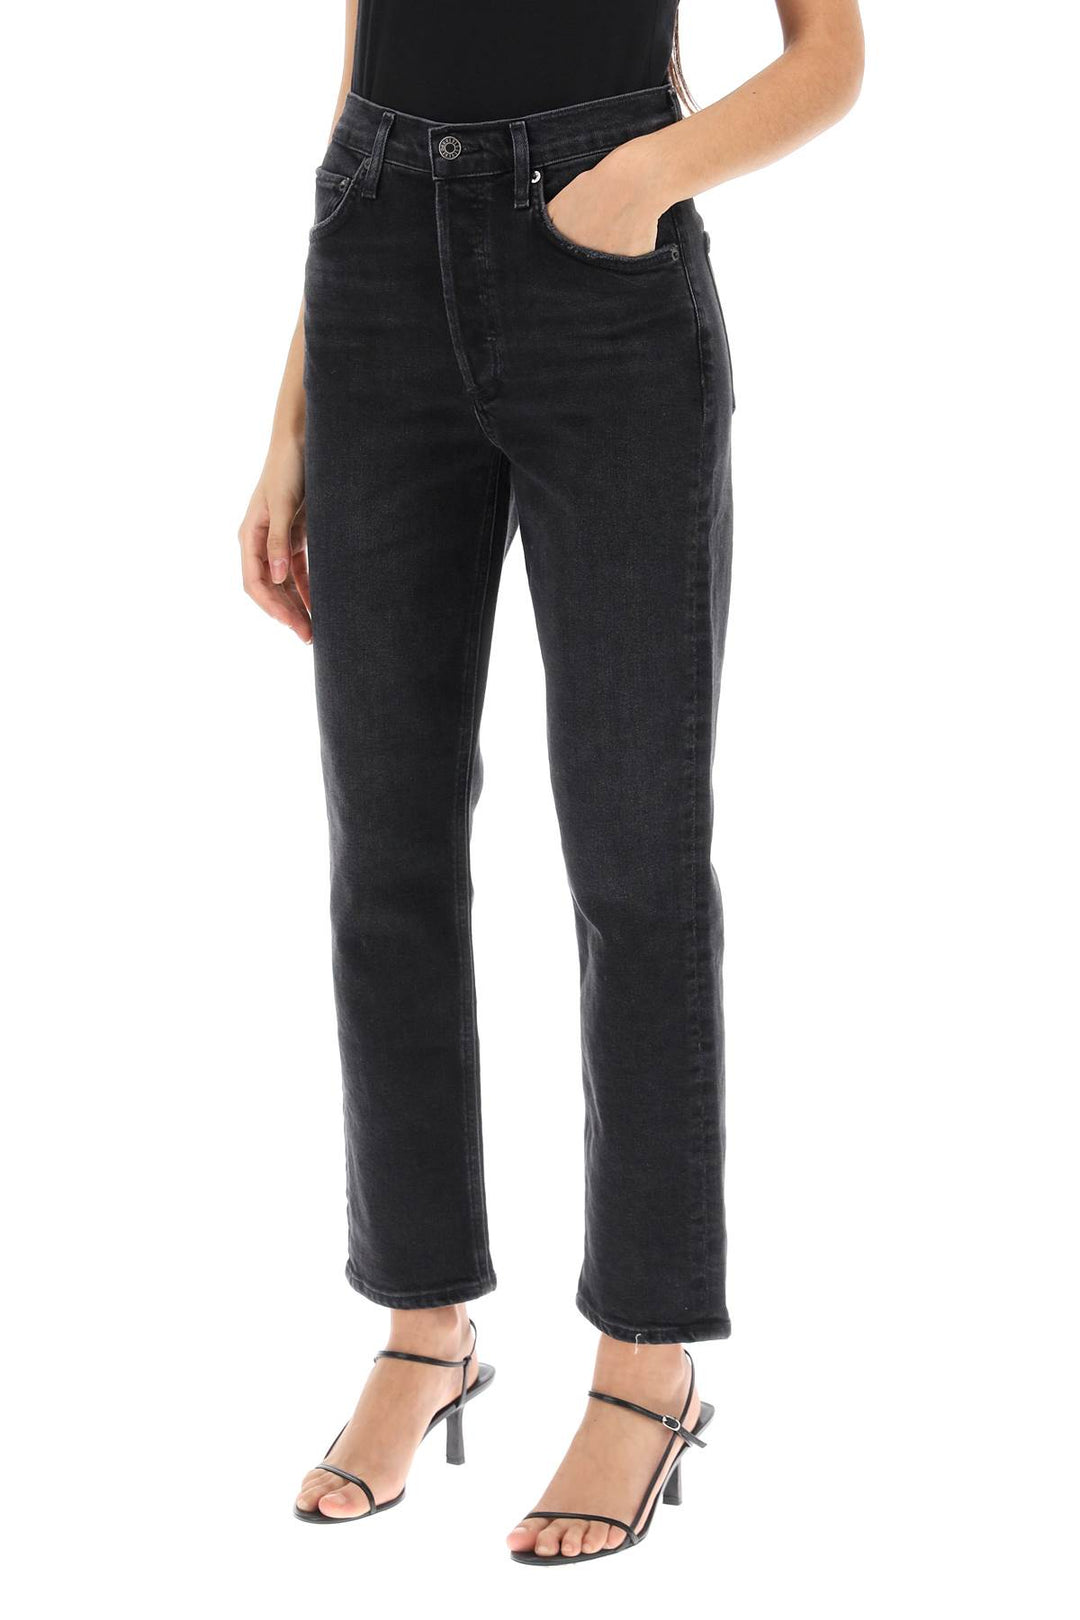 Agolde Riley High Waisted Jeans   Nero